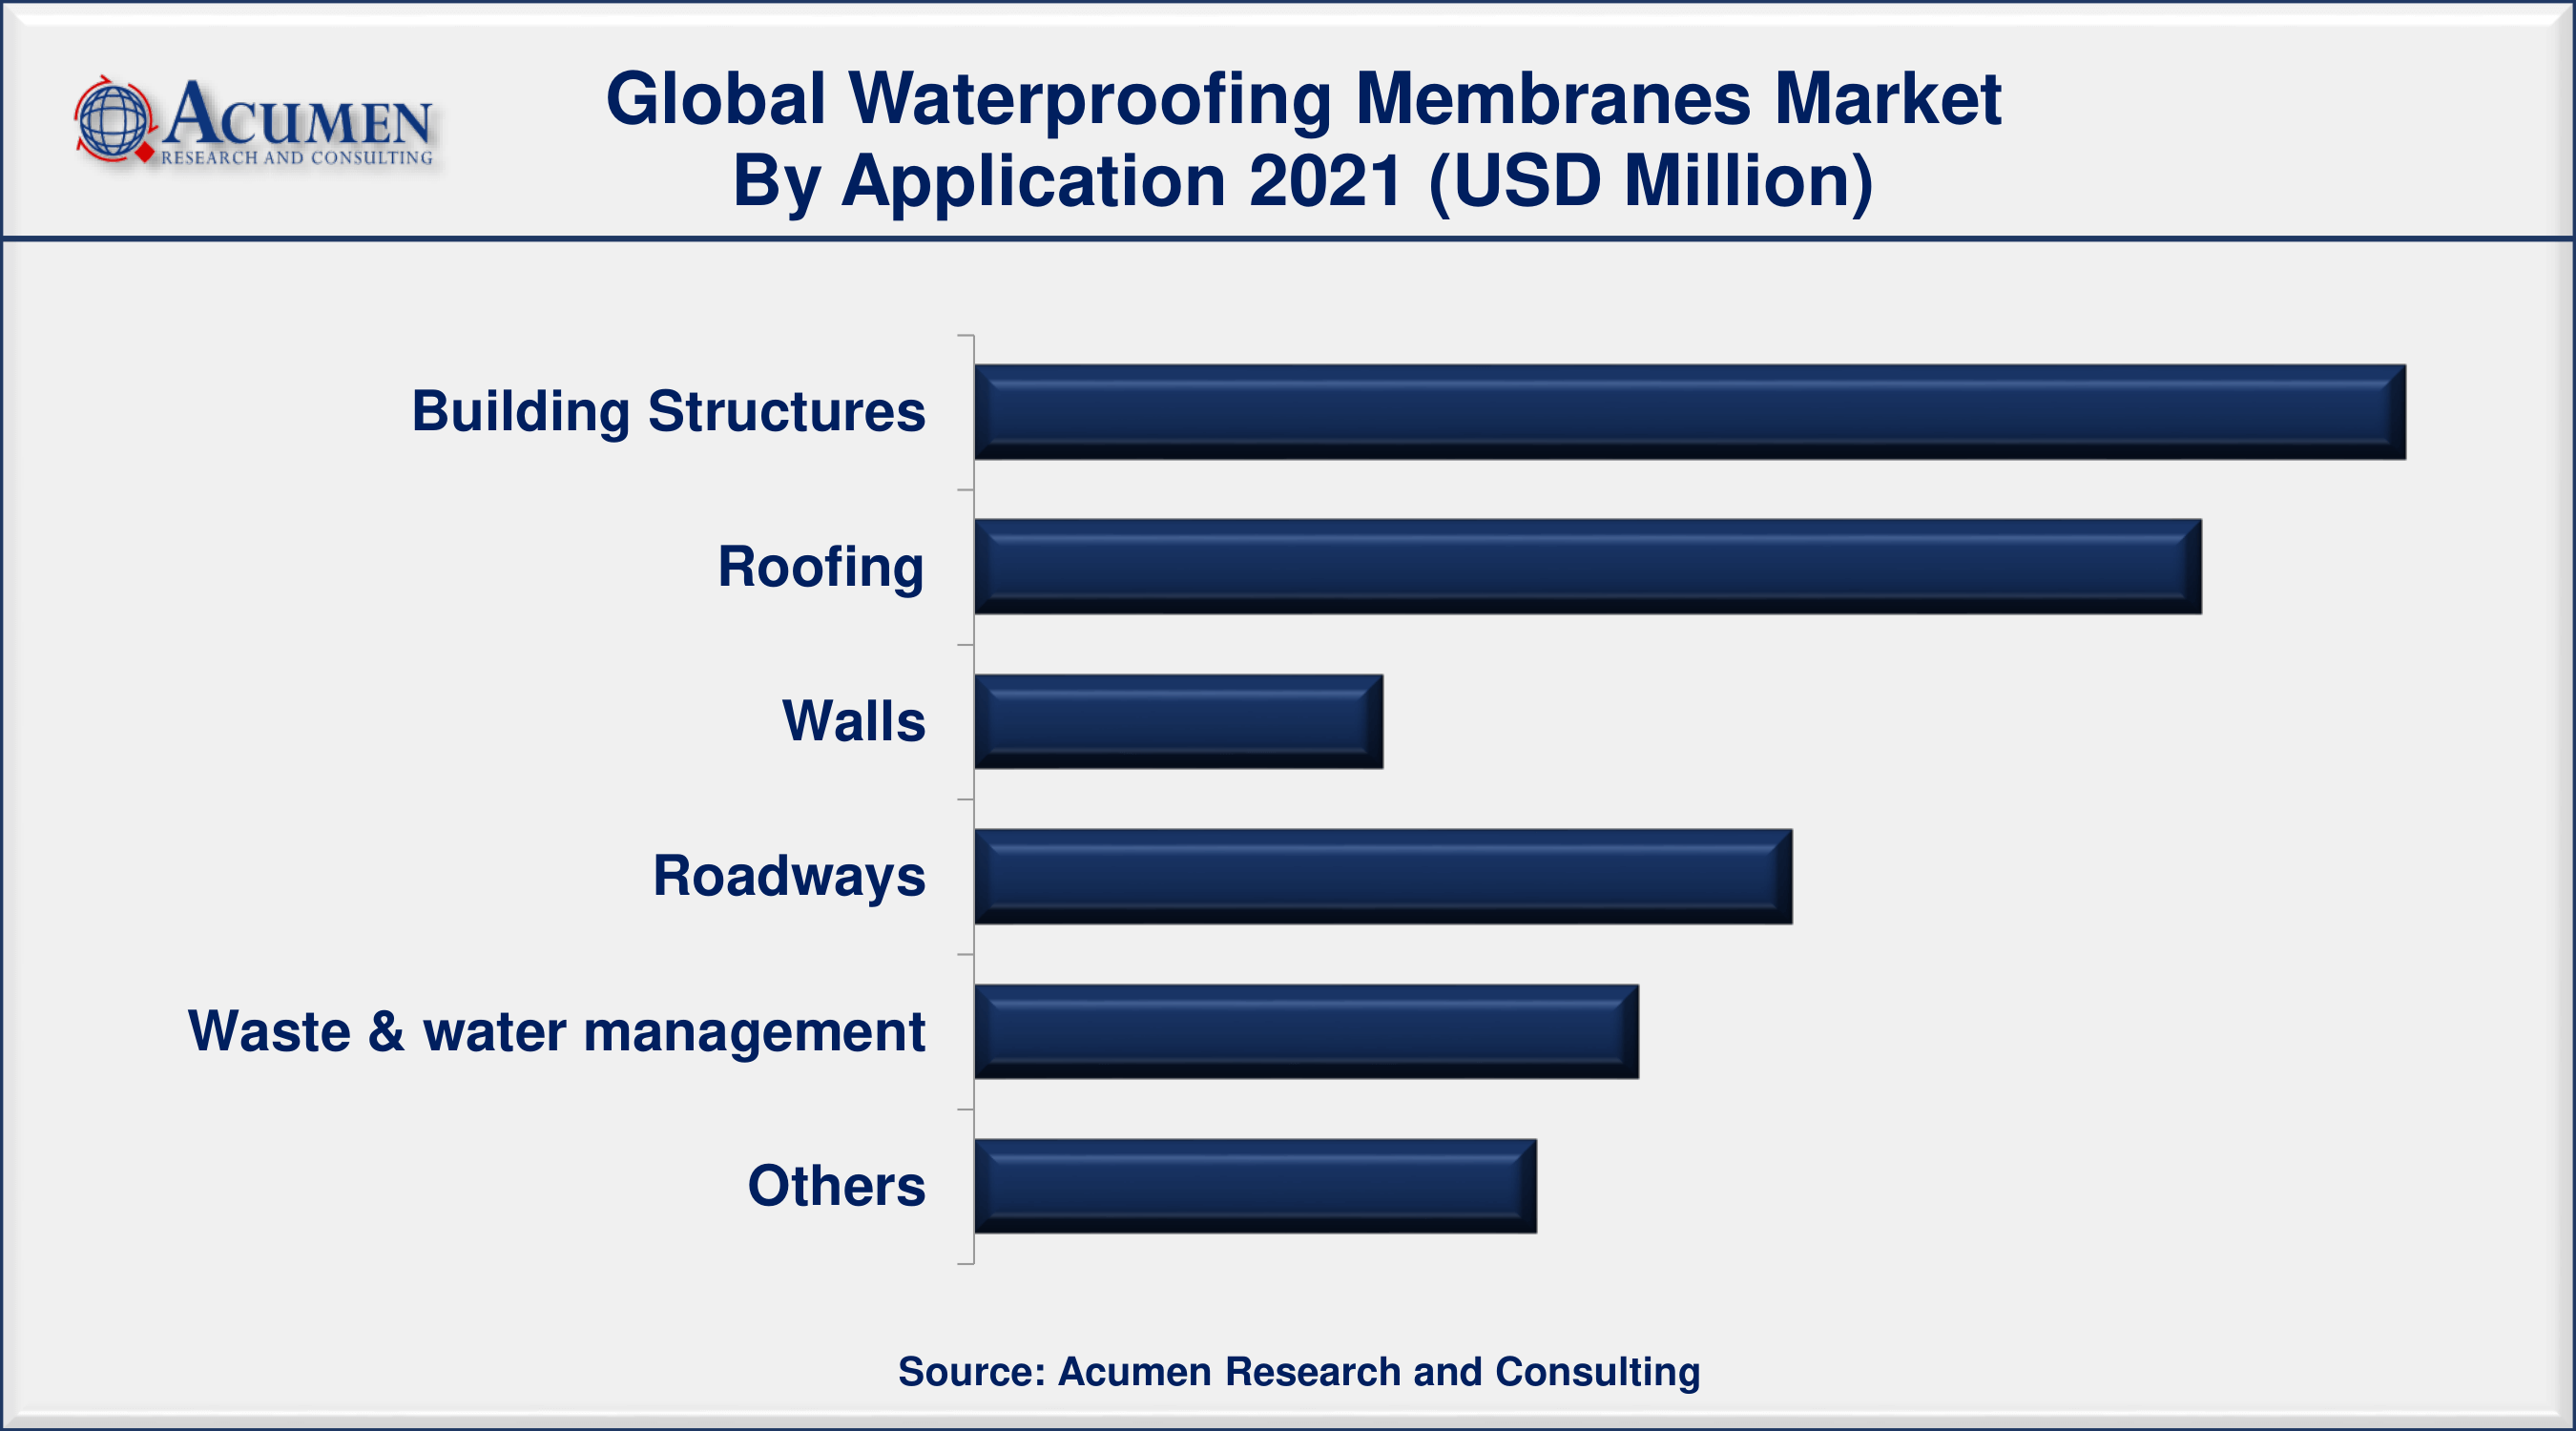 By application, the building structures segment has reached 28% market share in 2021